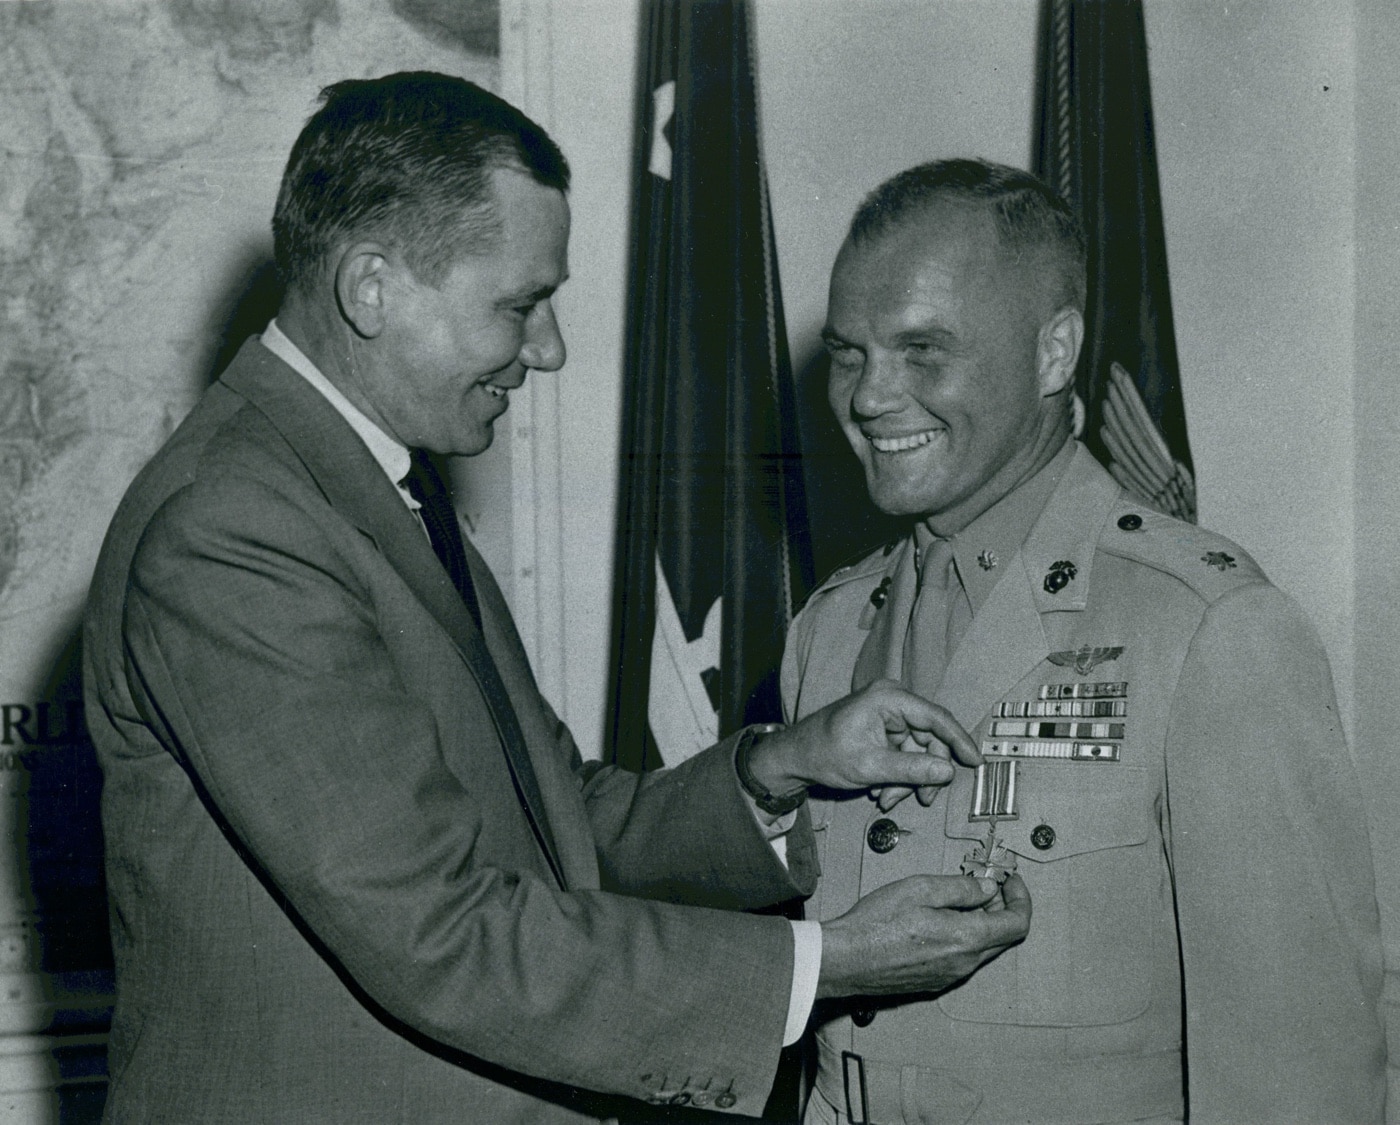 In this photo, Major John H. Glenn, Jr., U.S.M.C., received the Distinguished Flying Cross from the Secretary of the Navy. Glenn used the F-8 to become the first person to cross the continent faster than the speed of sound. John Glenn would later go on to be an integral part of the U.S. space program.